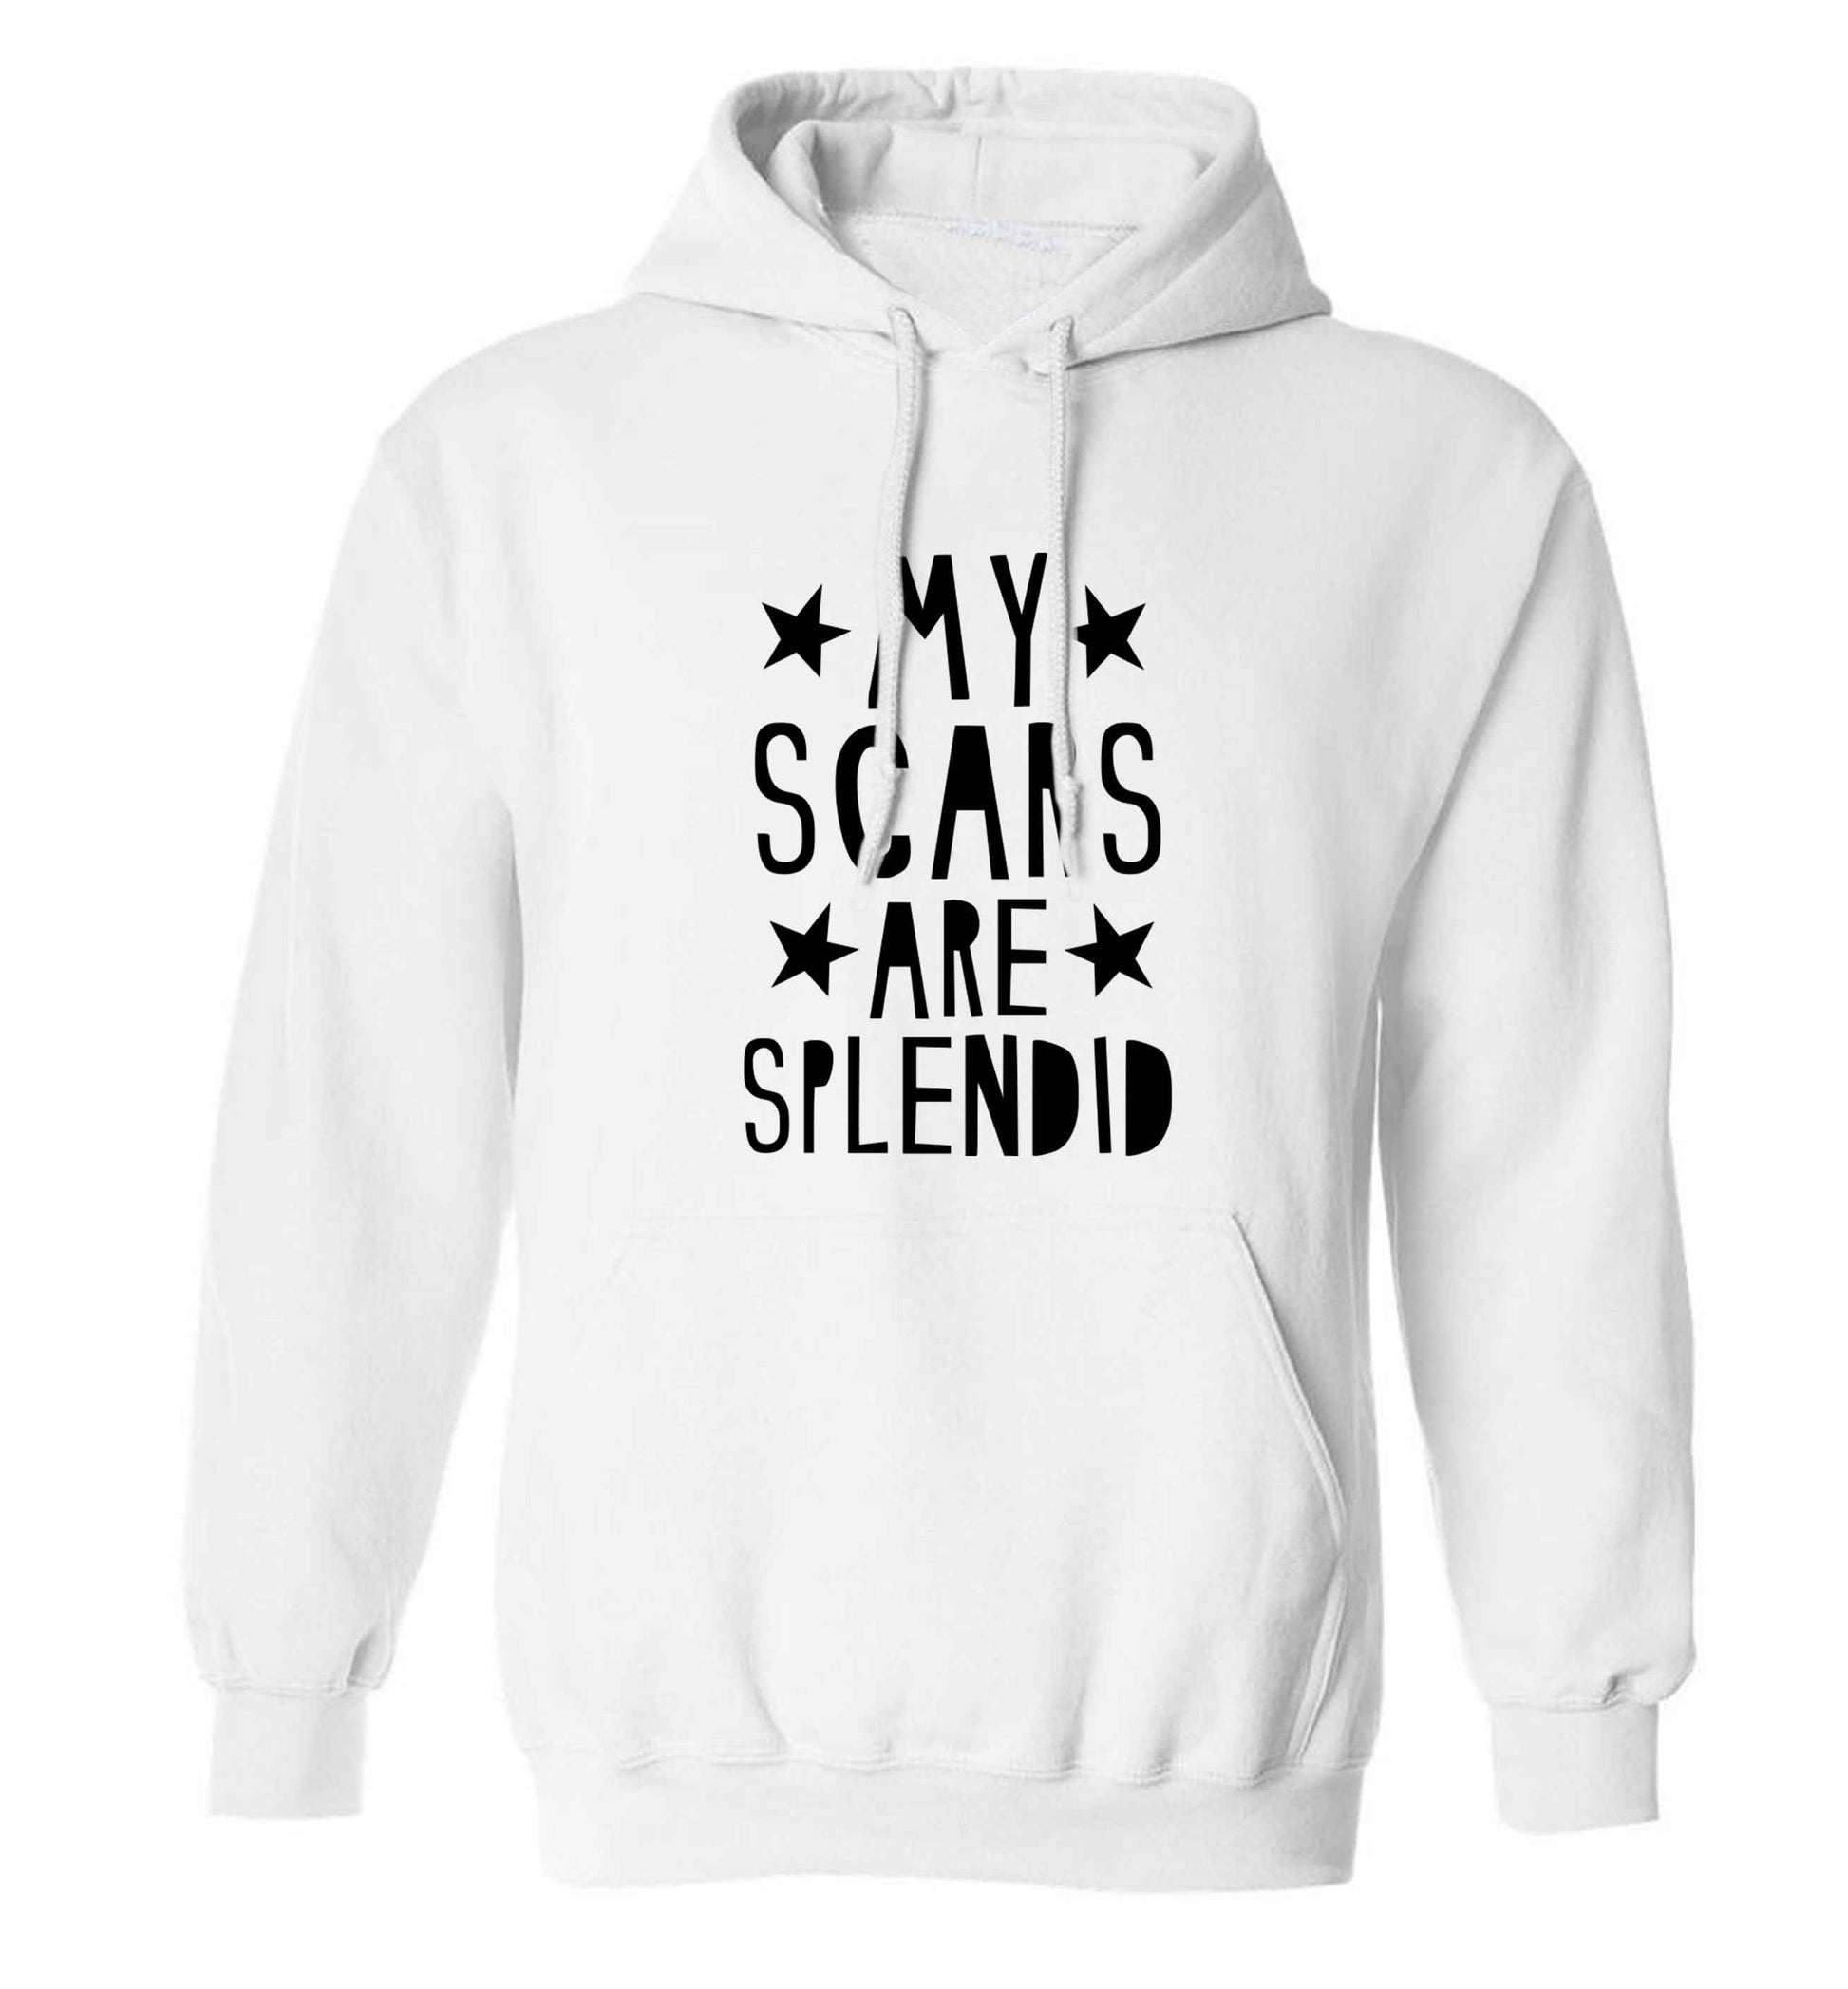 My scars are beautiful adults unisex white hoodie 2XL